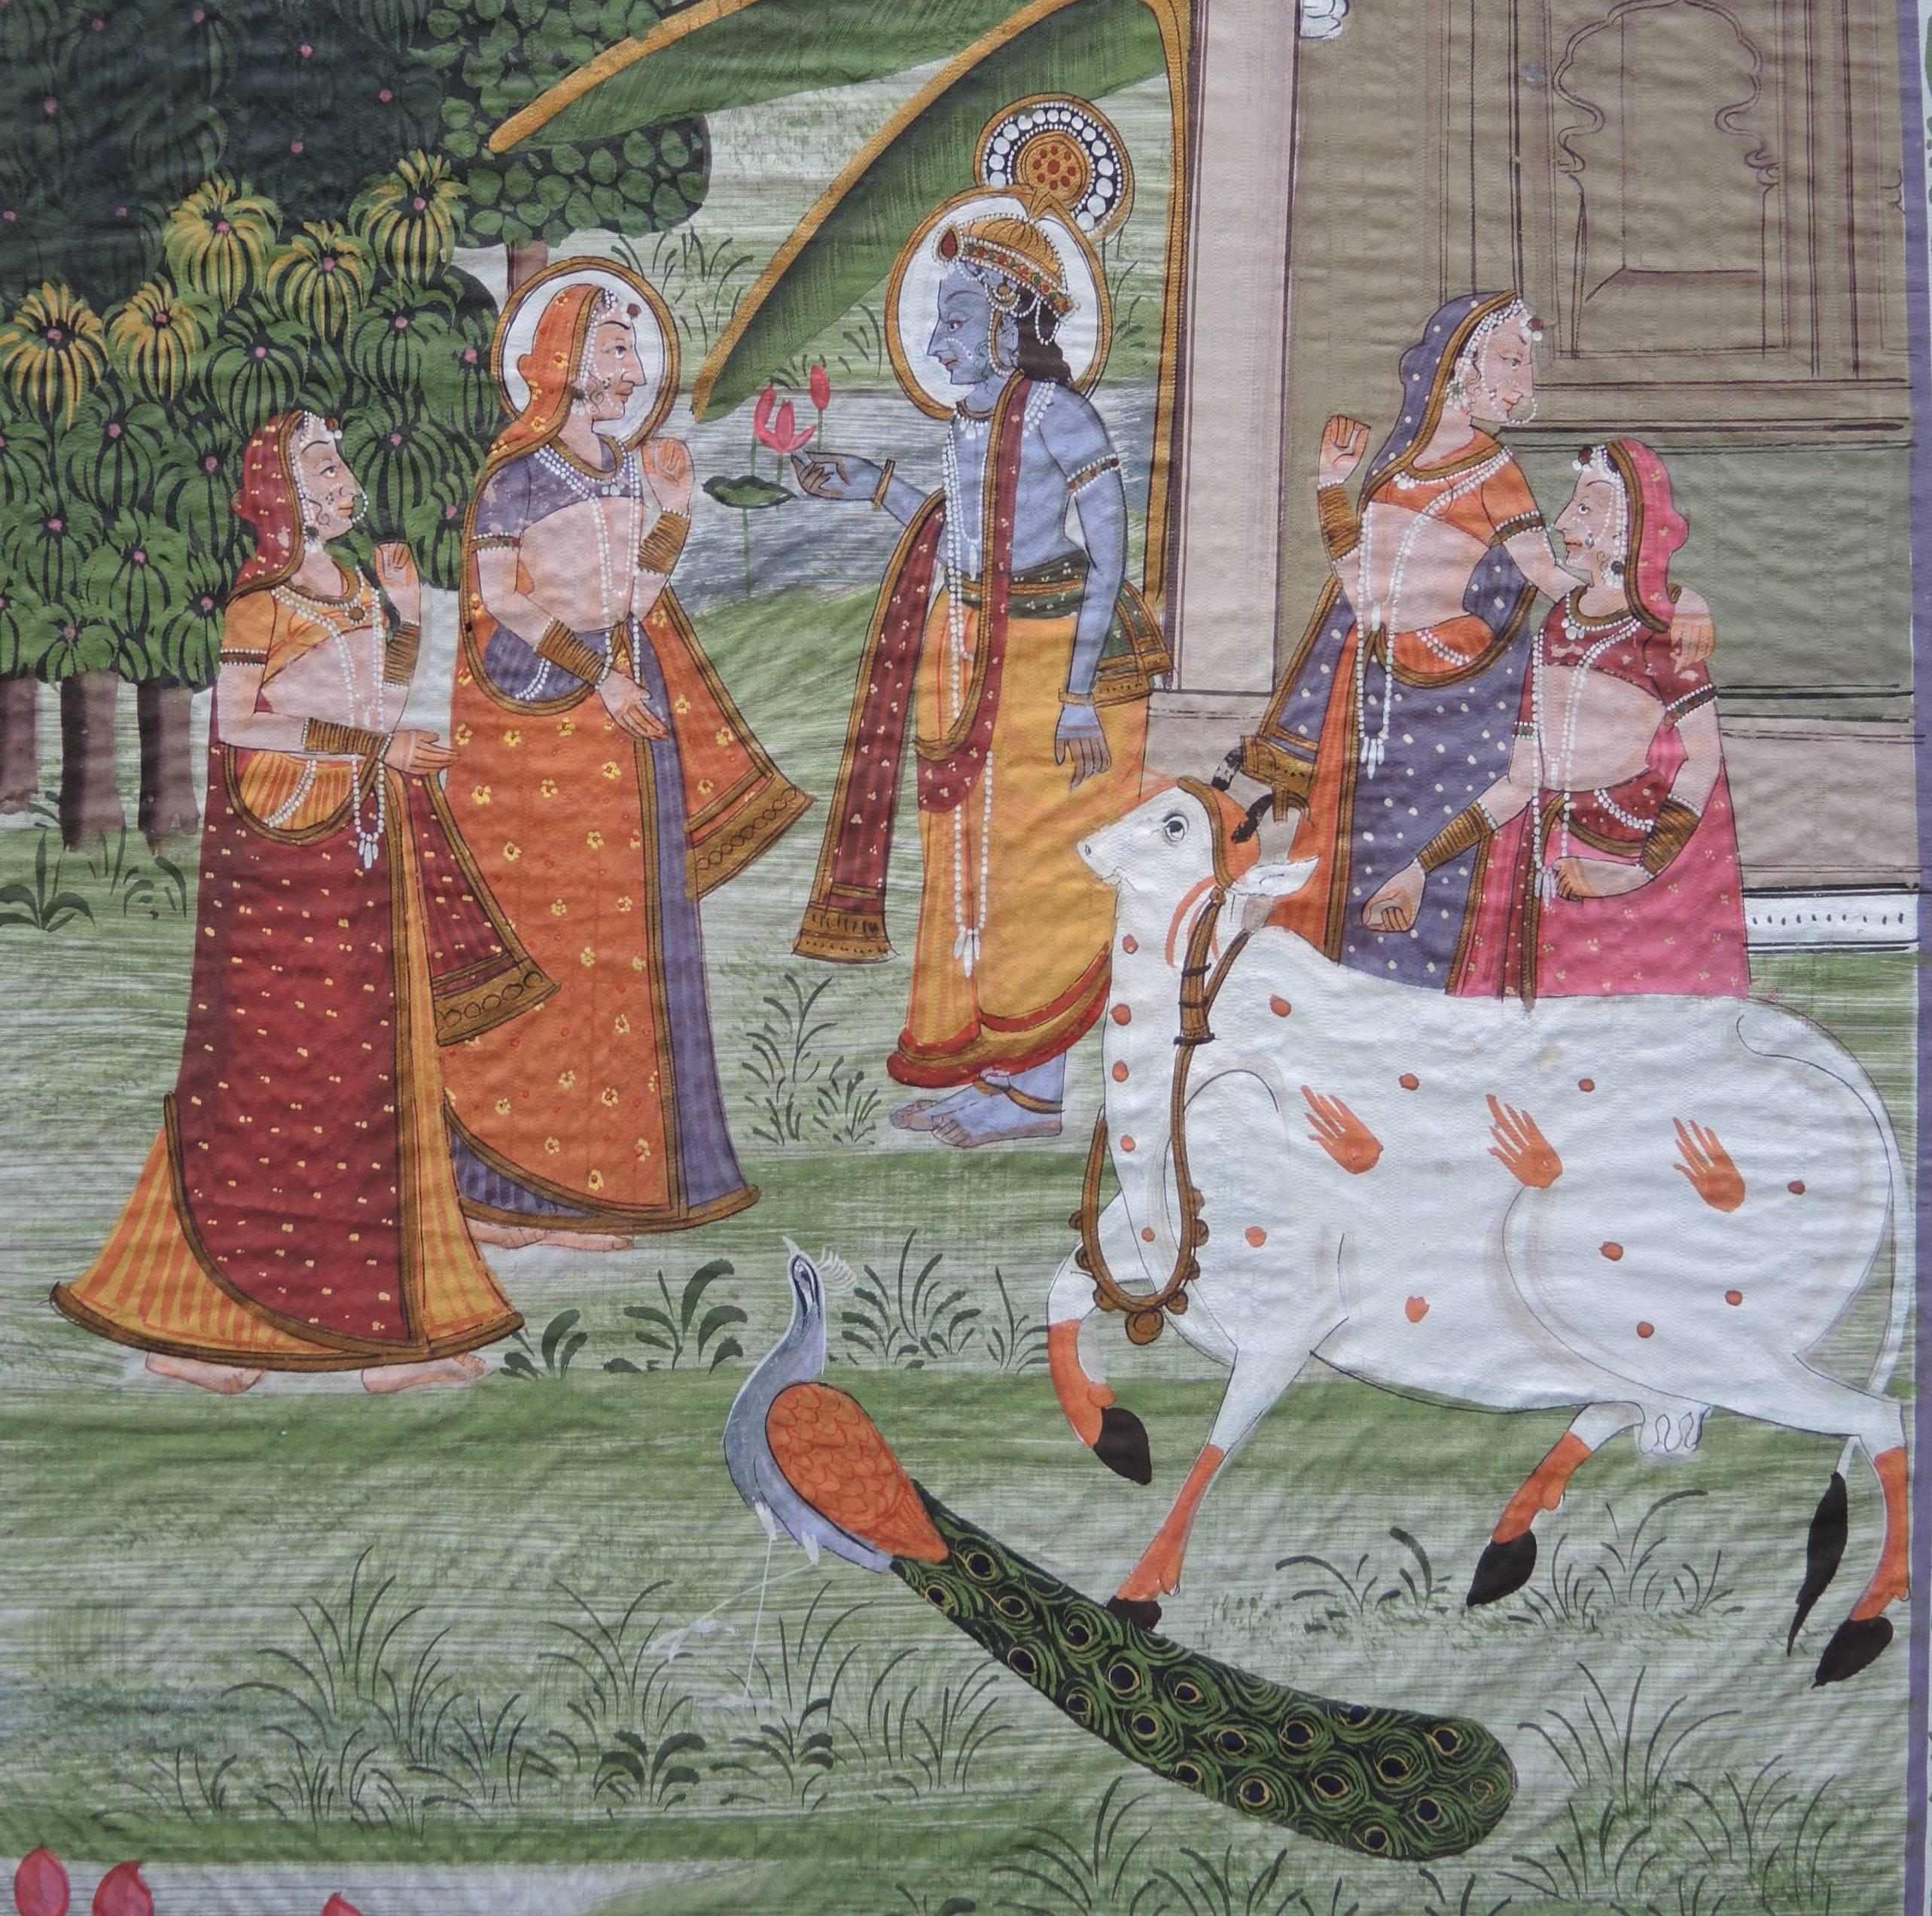 A very colorful and detailed Indian gouache painting on silk depicting Krishna with female Gopis and a sacred cow in a paradise like garden setting.
The colors are well preserved and the textile is in overall good condition except for some edge